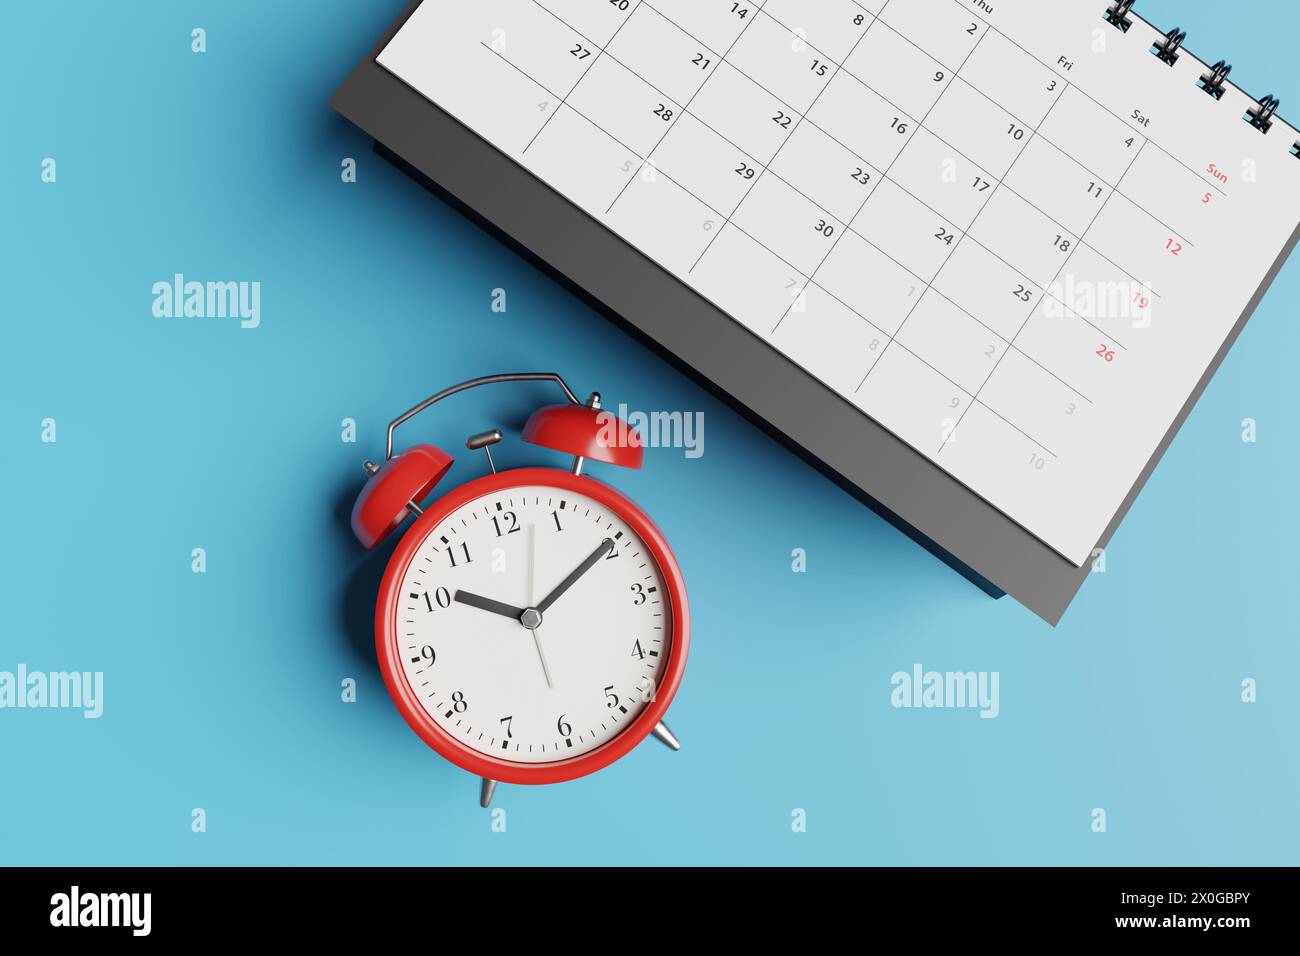 Black desk calendar and red alarm clock on blue background. Illustration of the concept of tight schedule, deadlines, due dates and workload Stock Photo